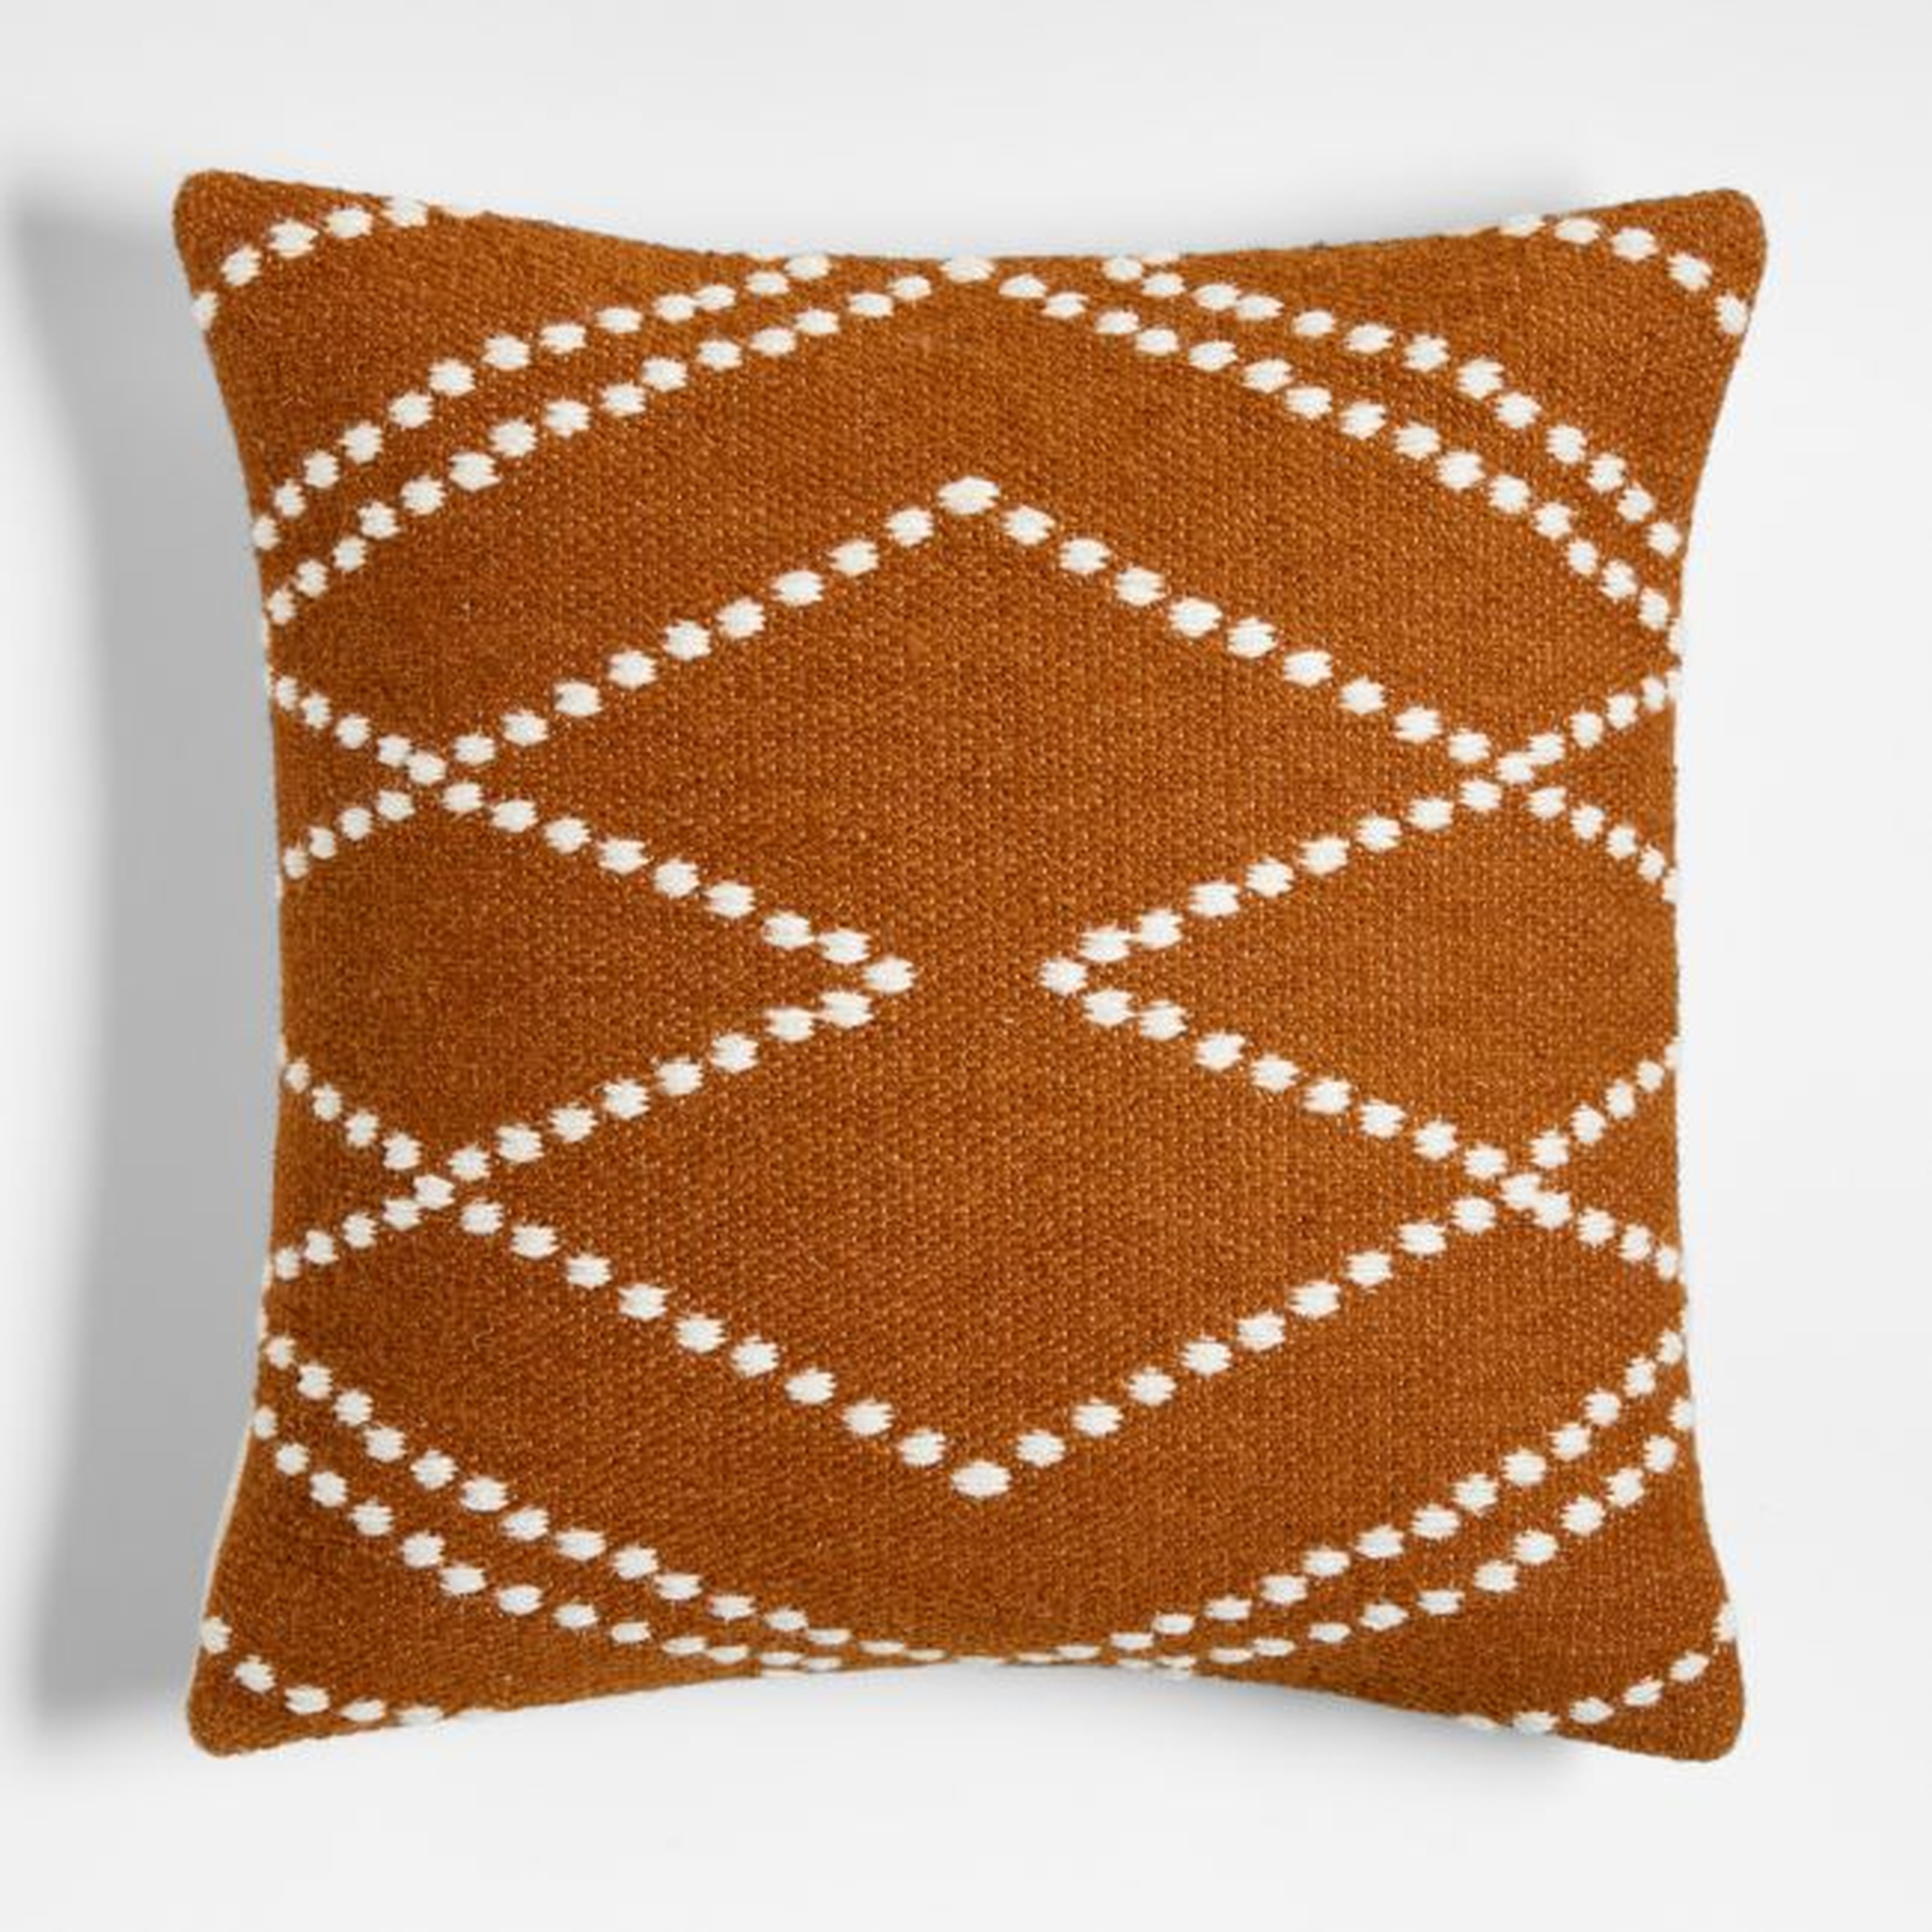 Byzan 23"x23" Amber Kilim Throw Pillow Cover - Crate and Barrel